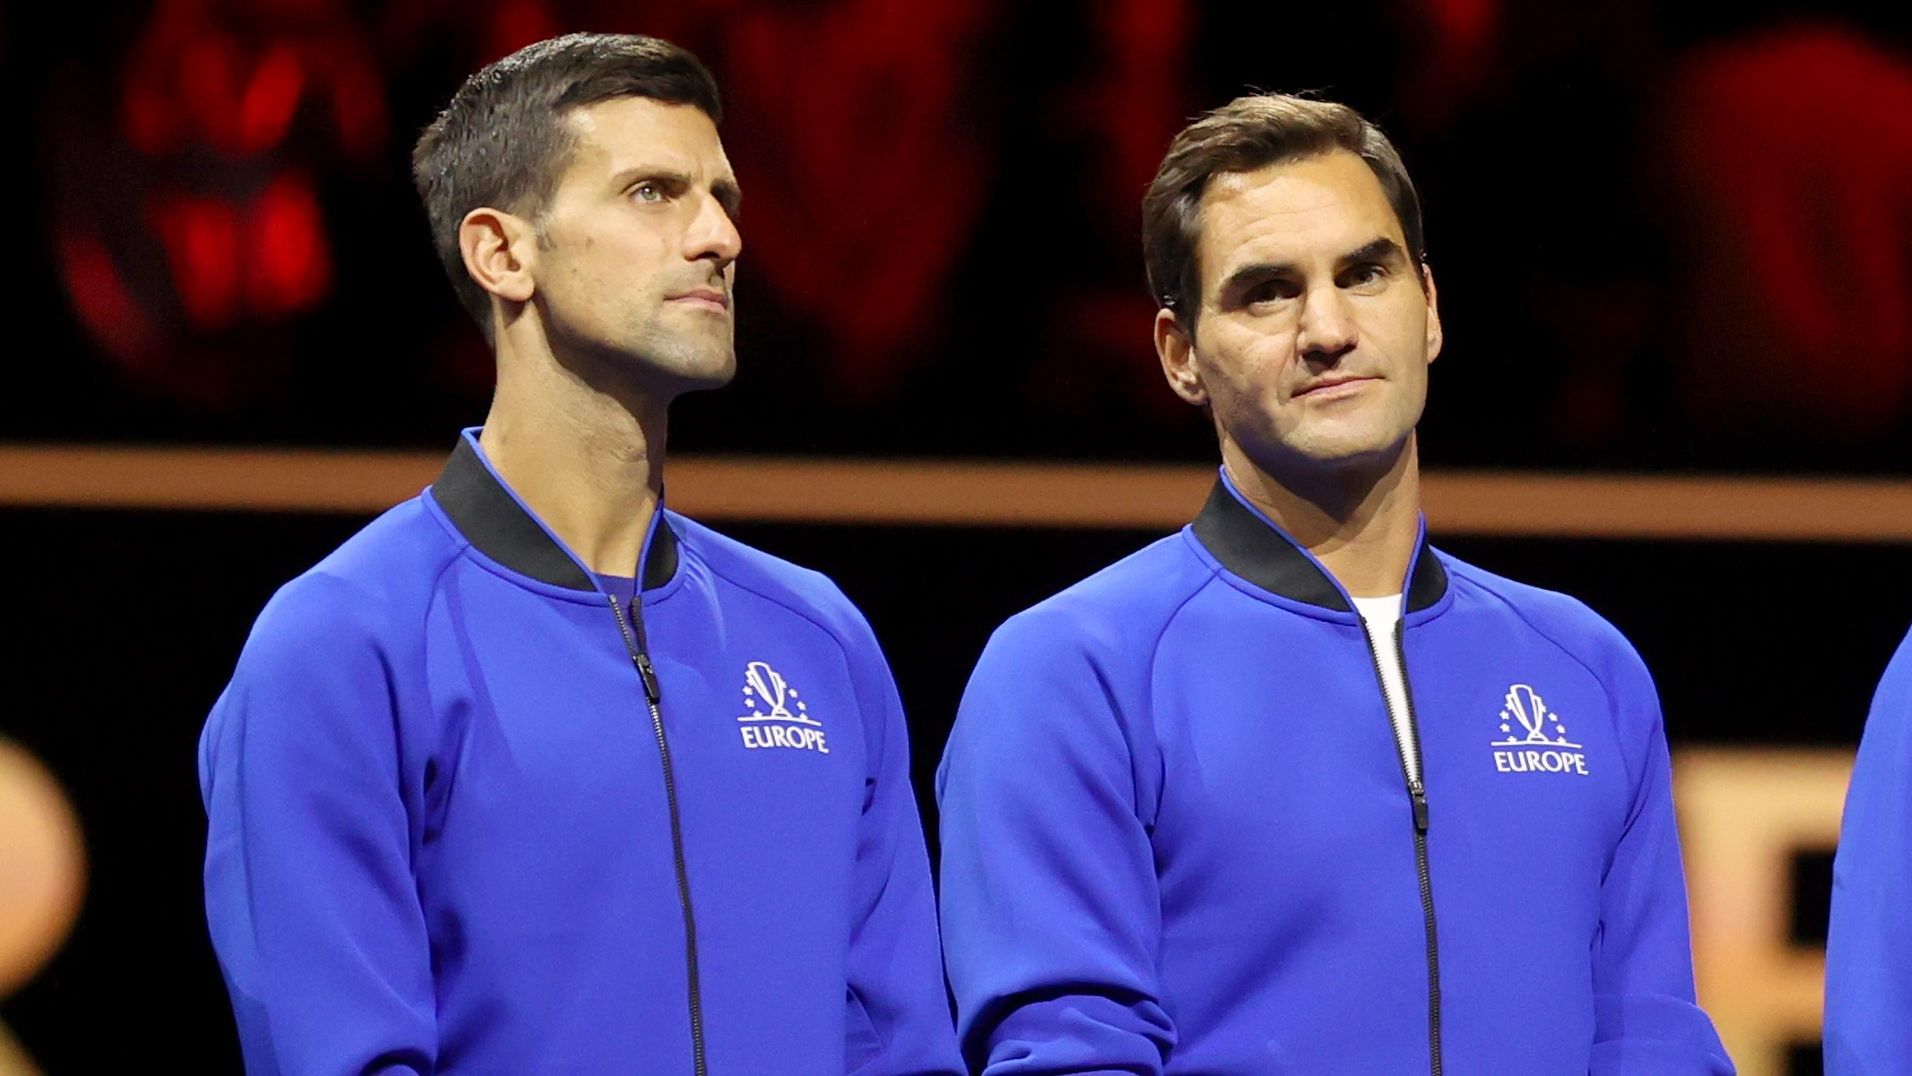 Novak Djokovic and Roger Federer attend the trophy ceremony after the Laver Cup.